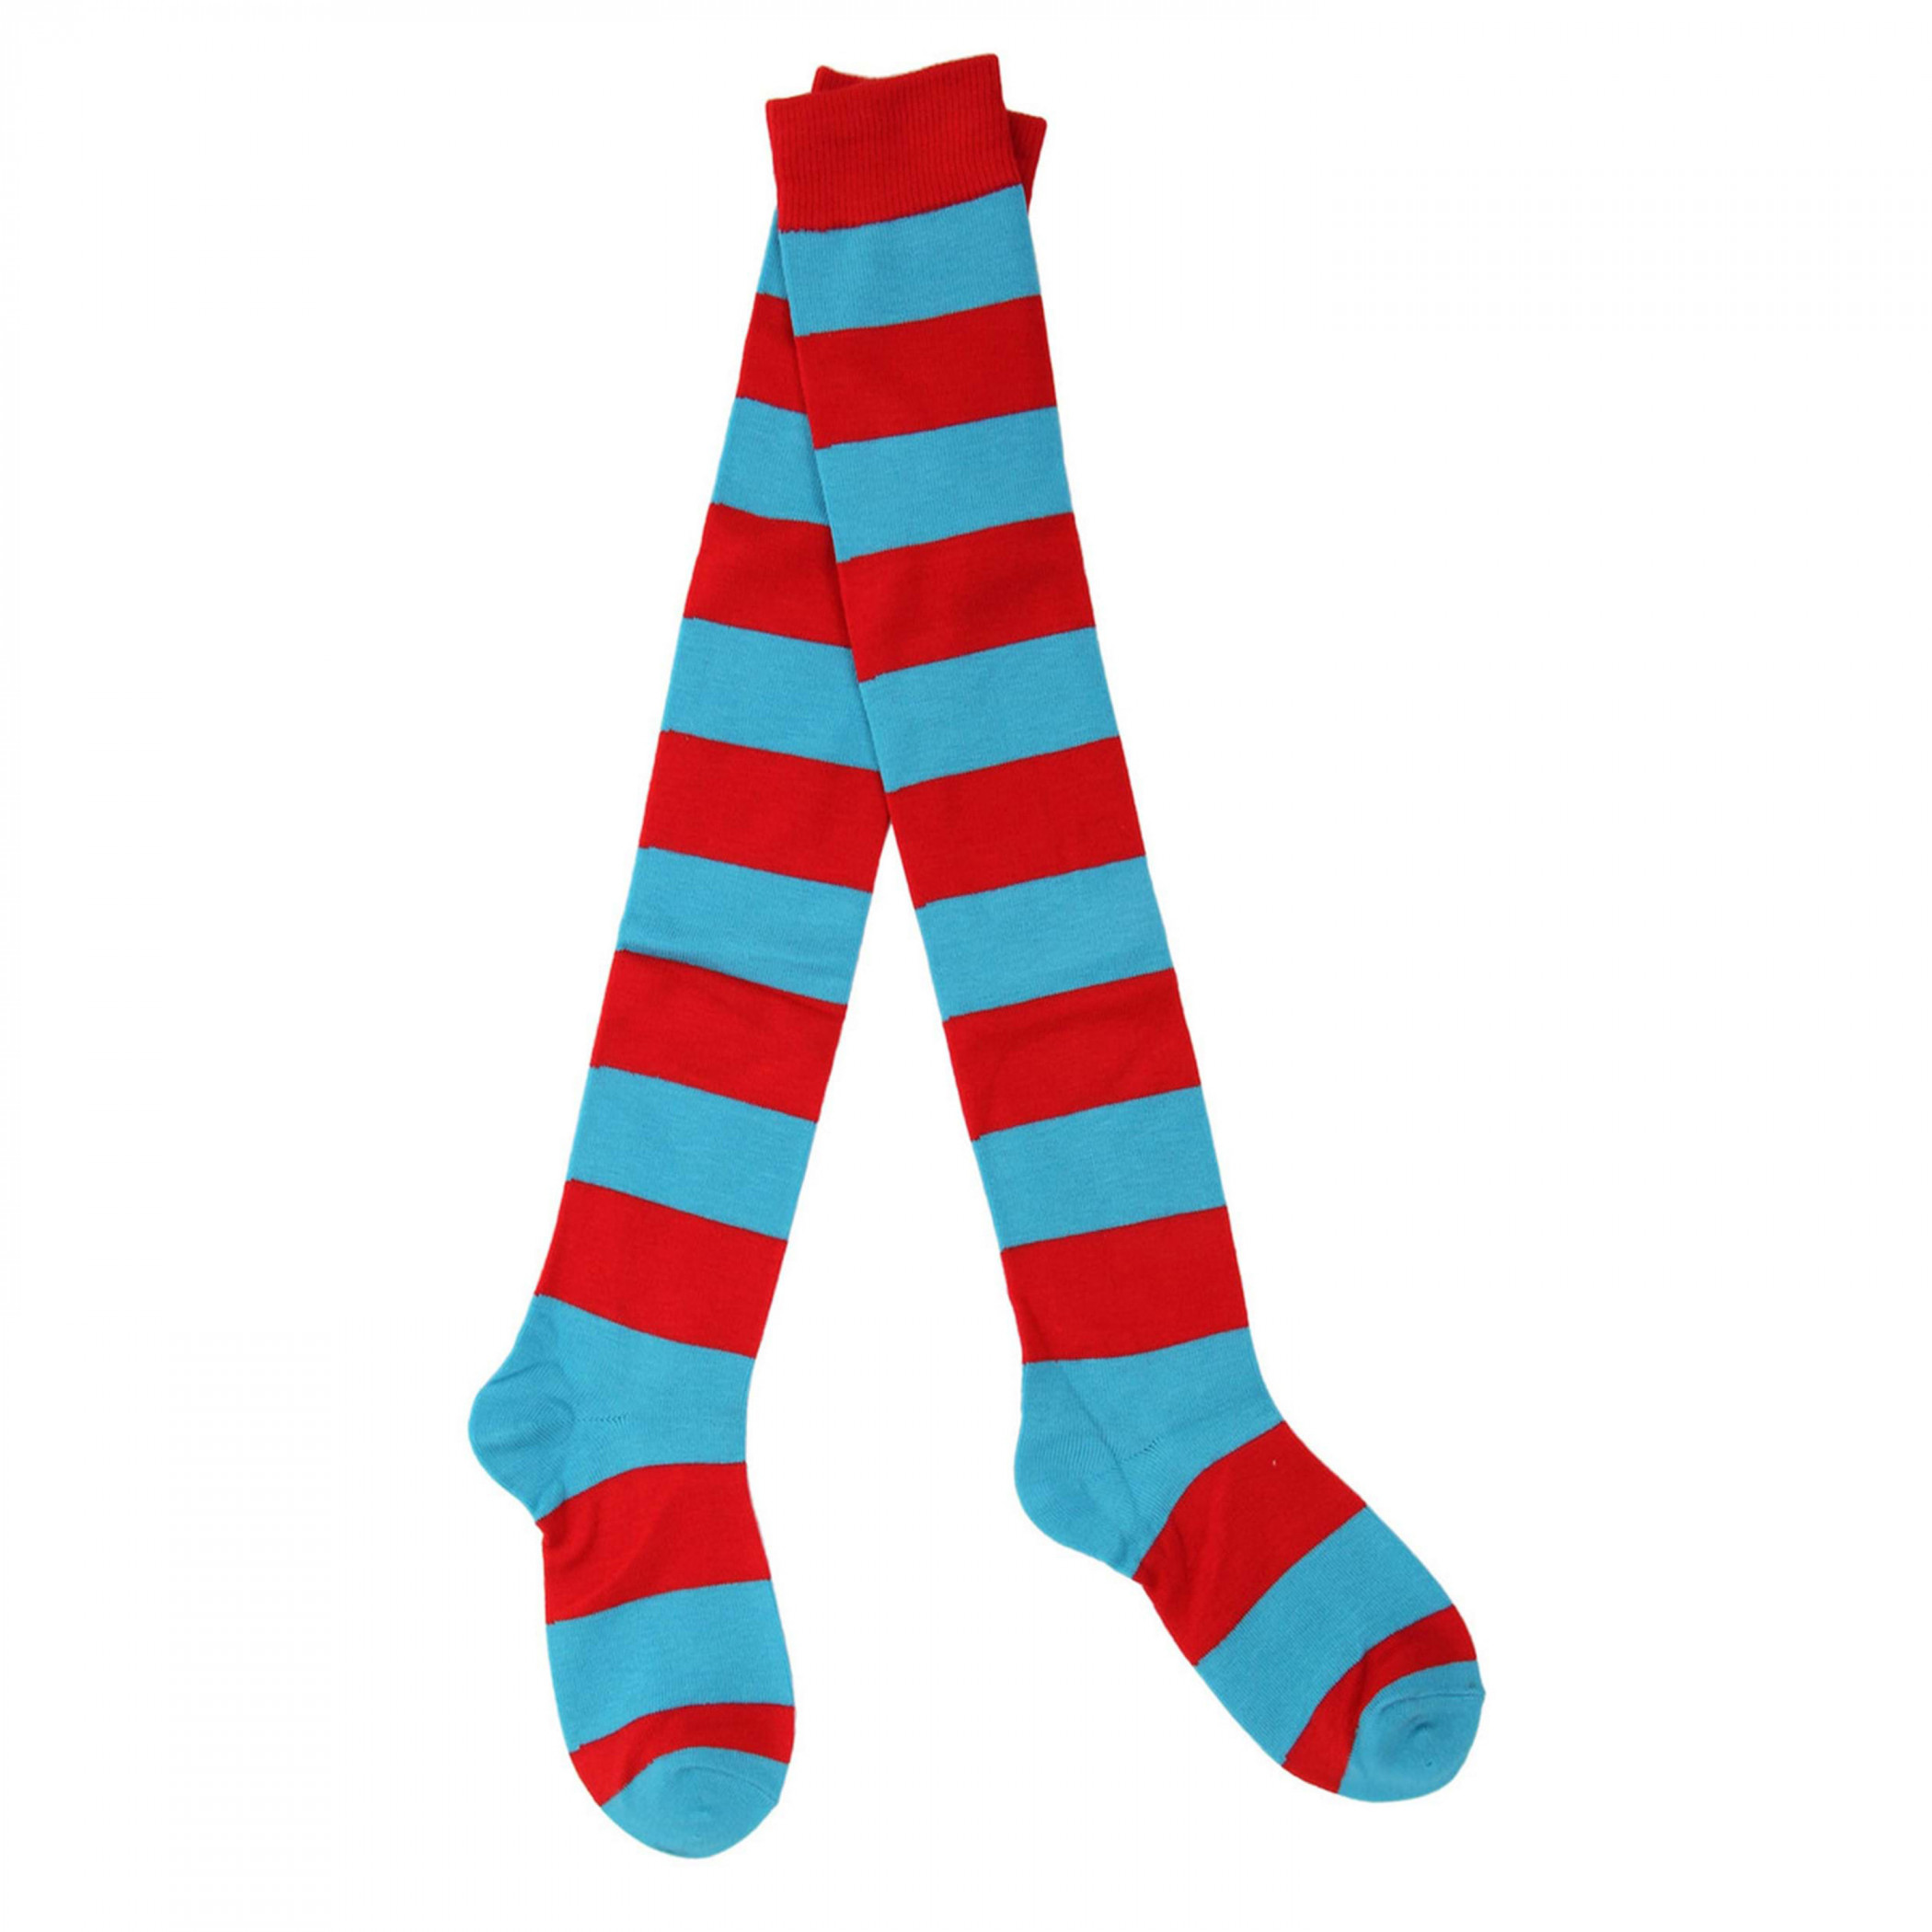 Dr. Seuss Thing 1 and Thing 2 Striped Socks